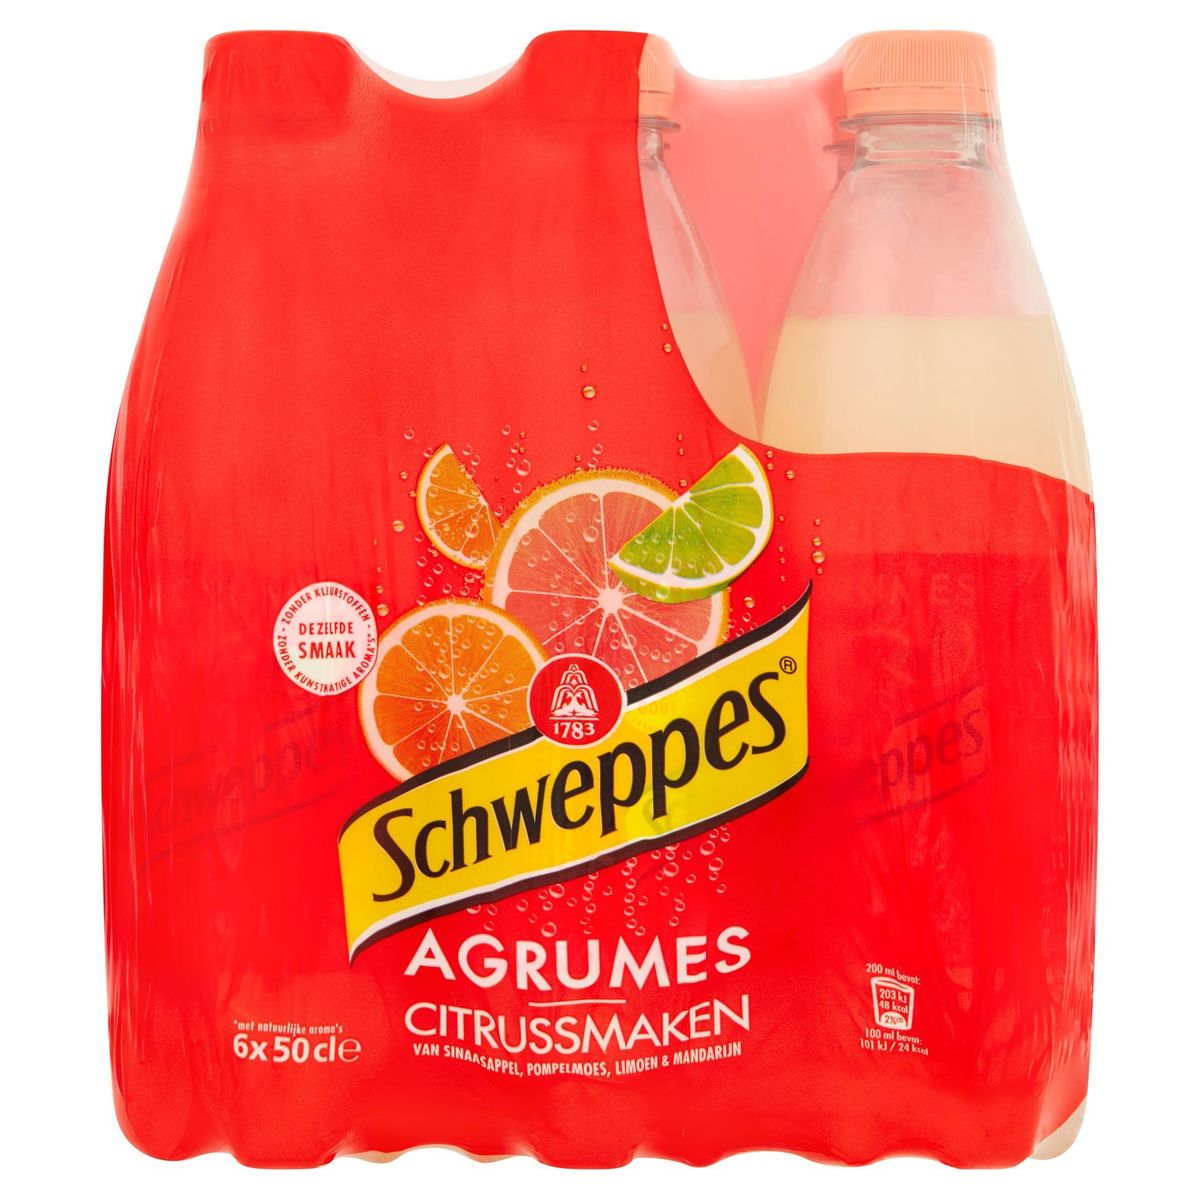 Schweppes Agrumes 6x50cl